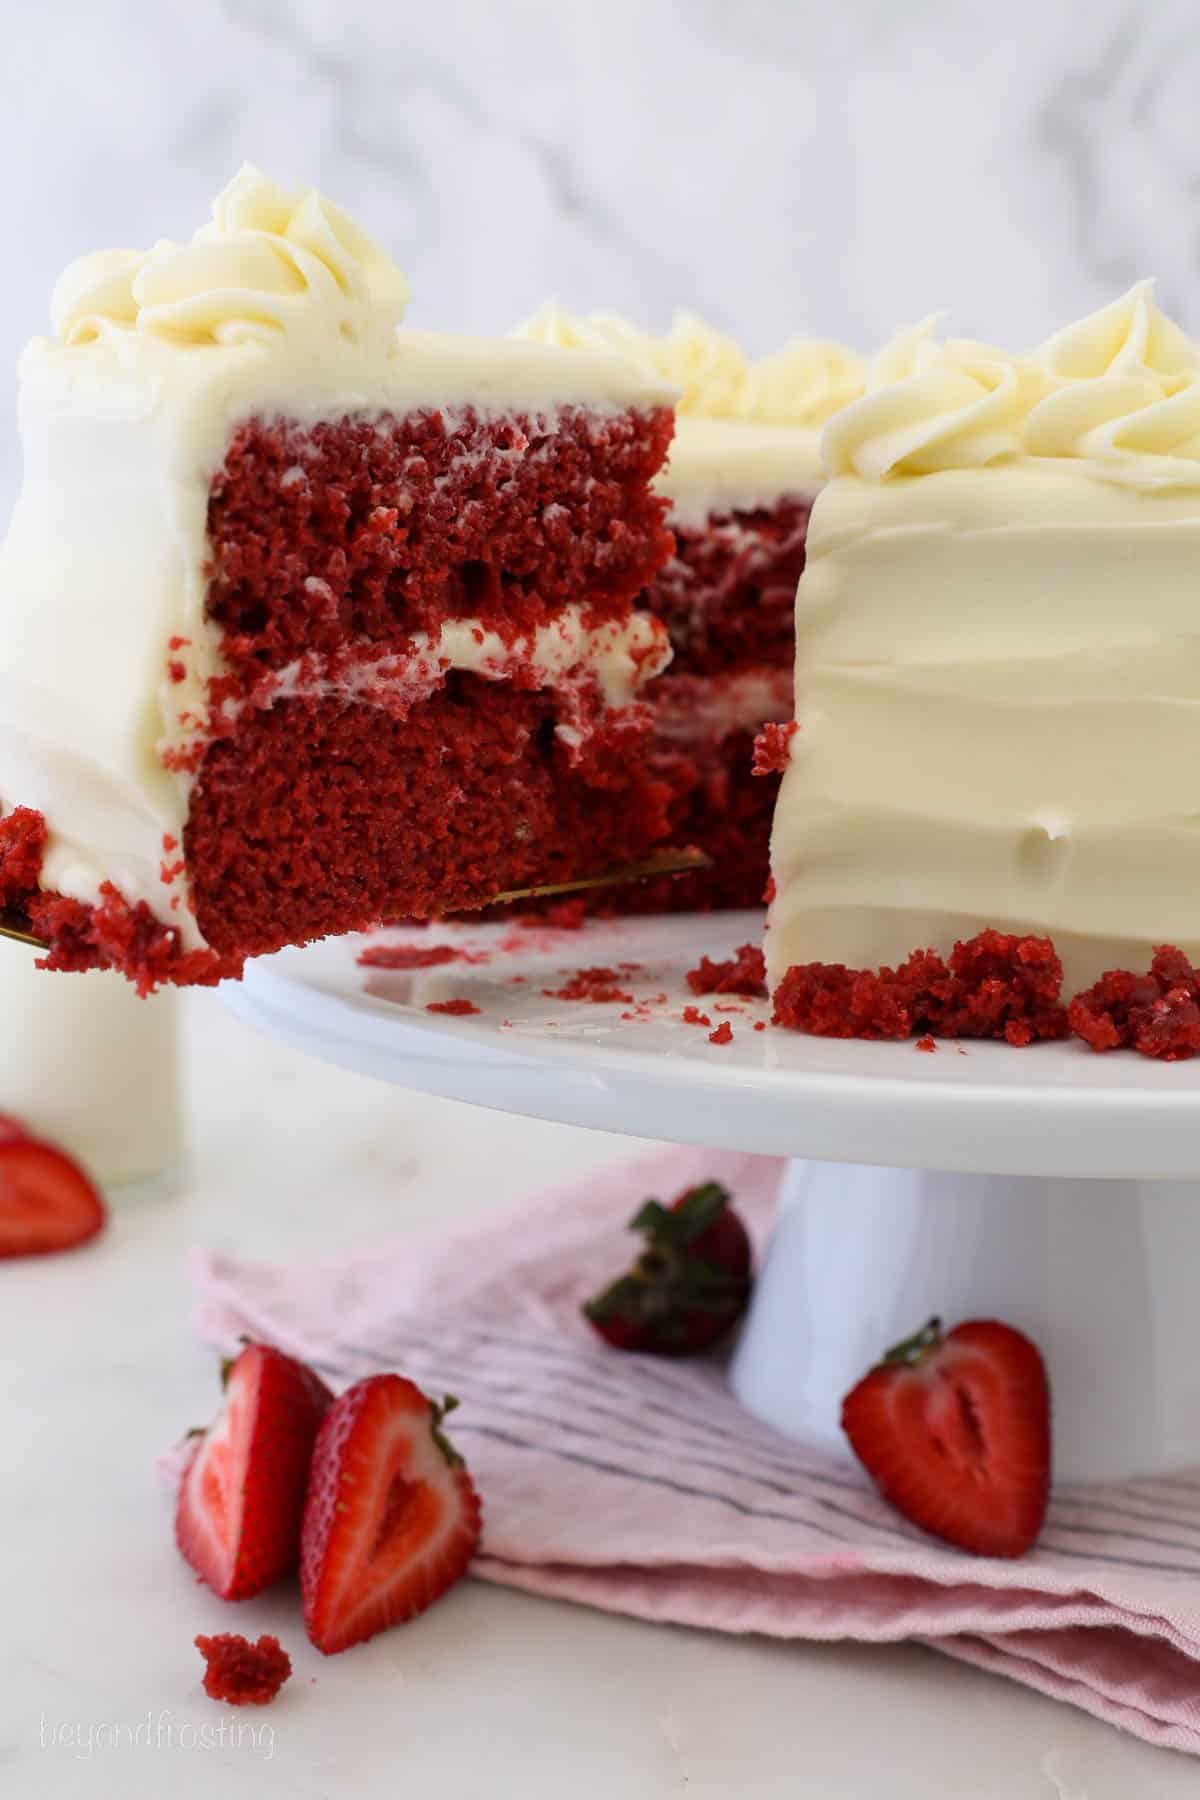 Angled view of red velvet cake with one slice missing